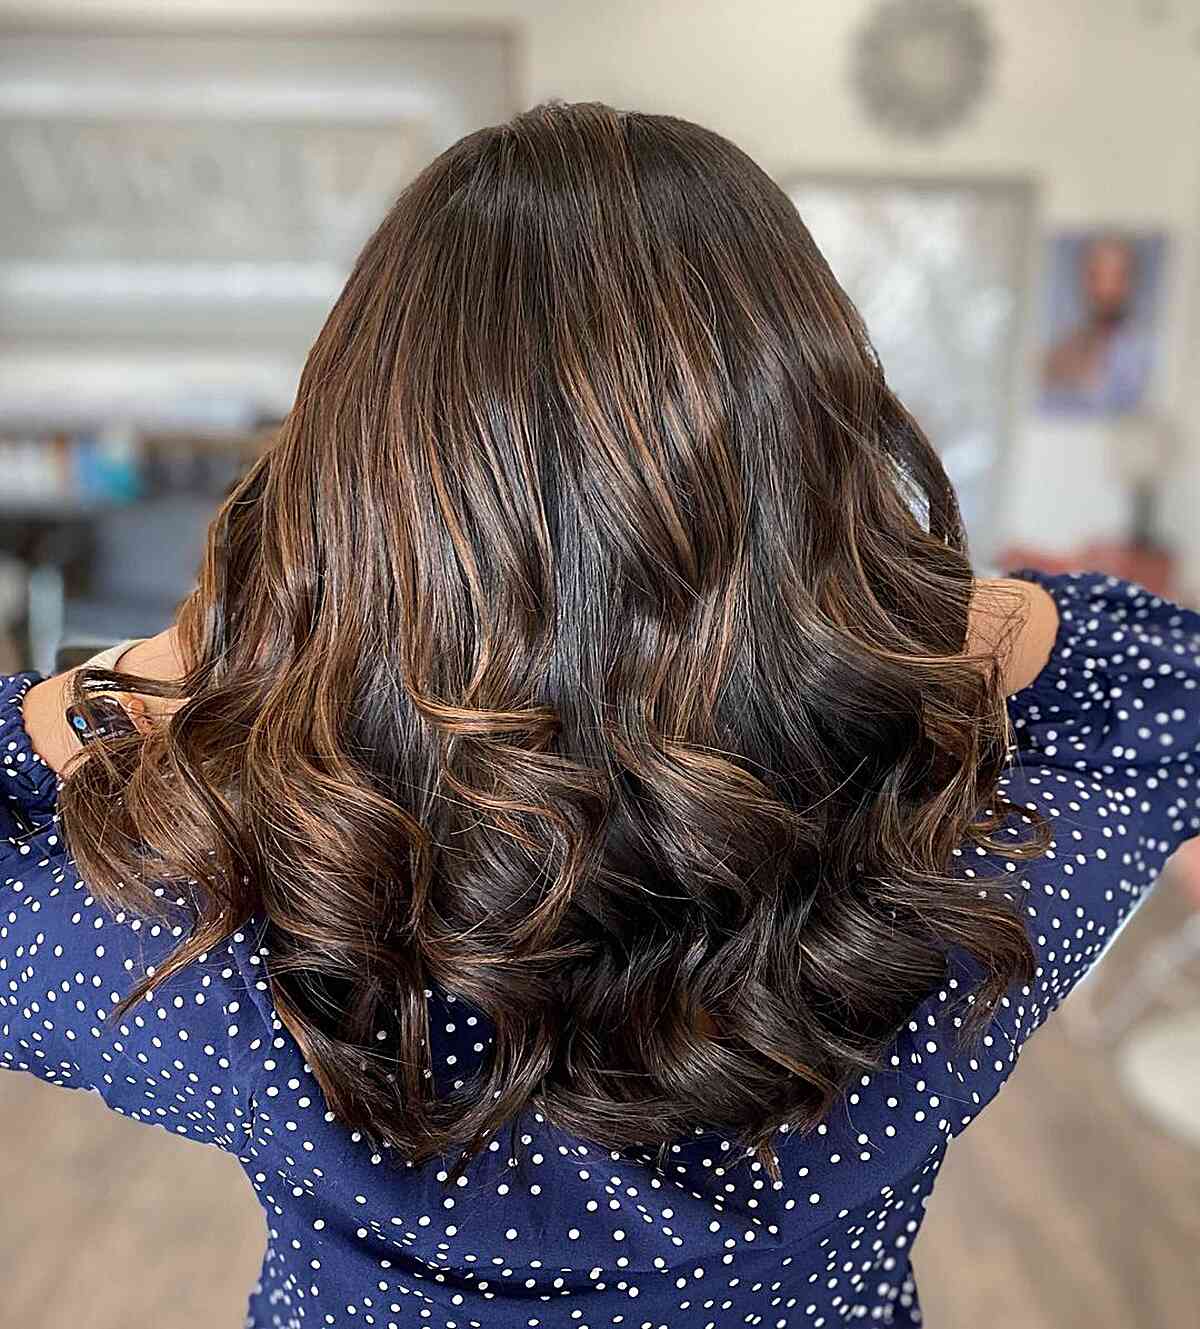 Chocolate Caramel Brown Balayage Highlights with Curly Ends on Mid-Length Dark Brunette Hair